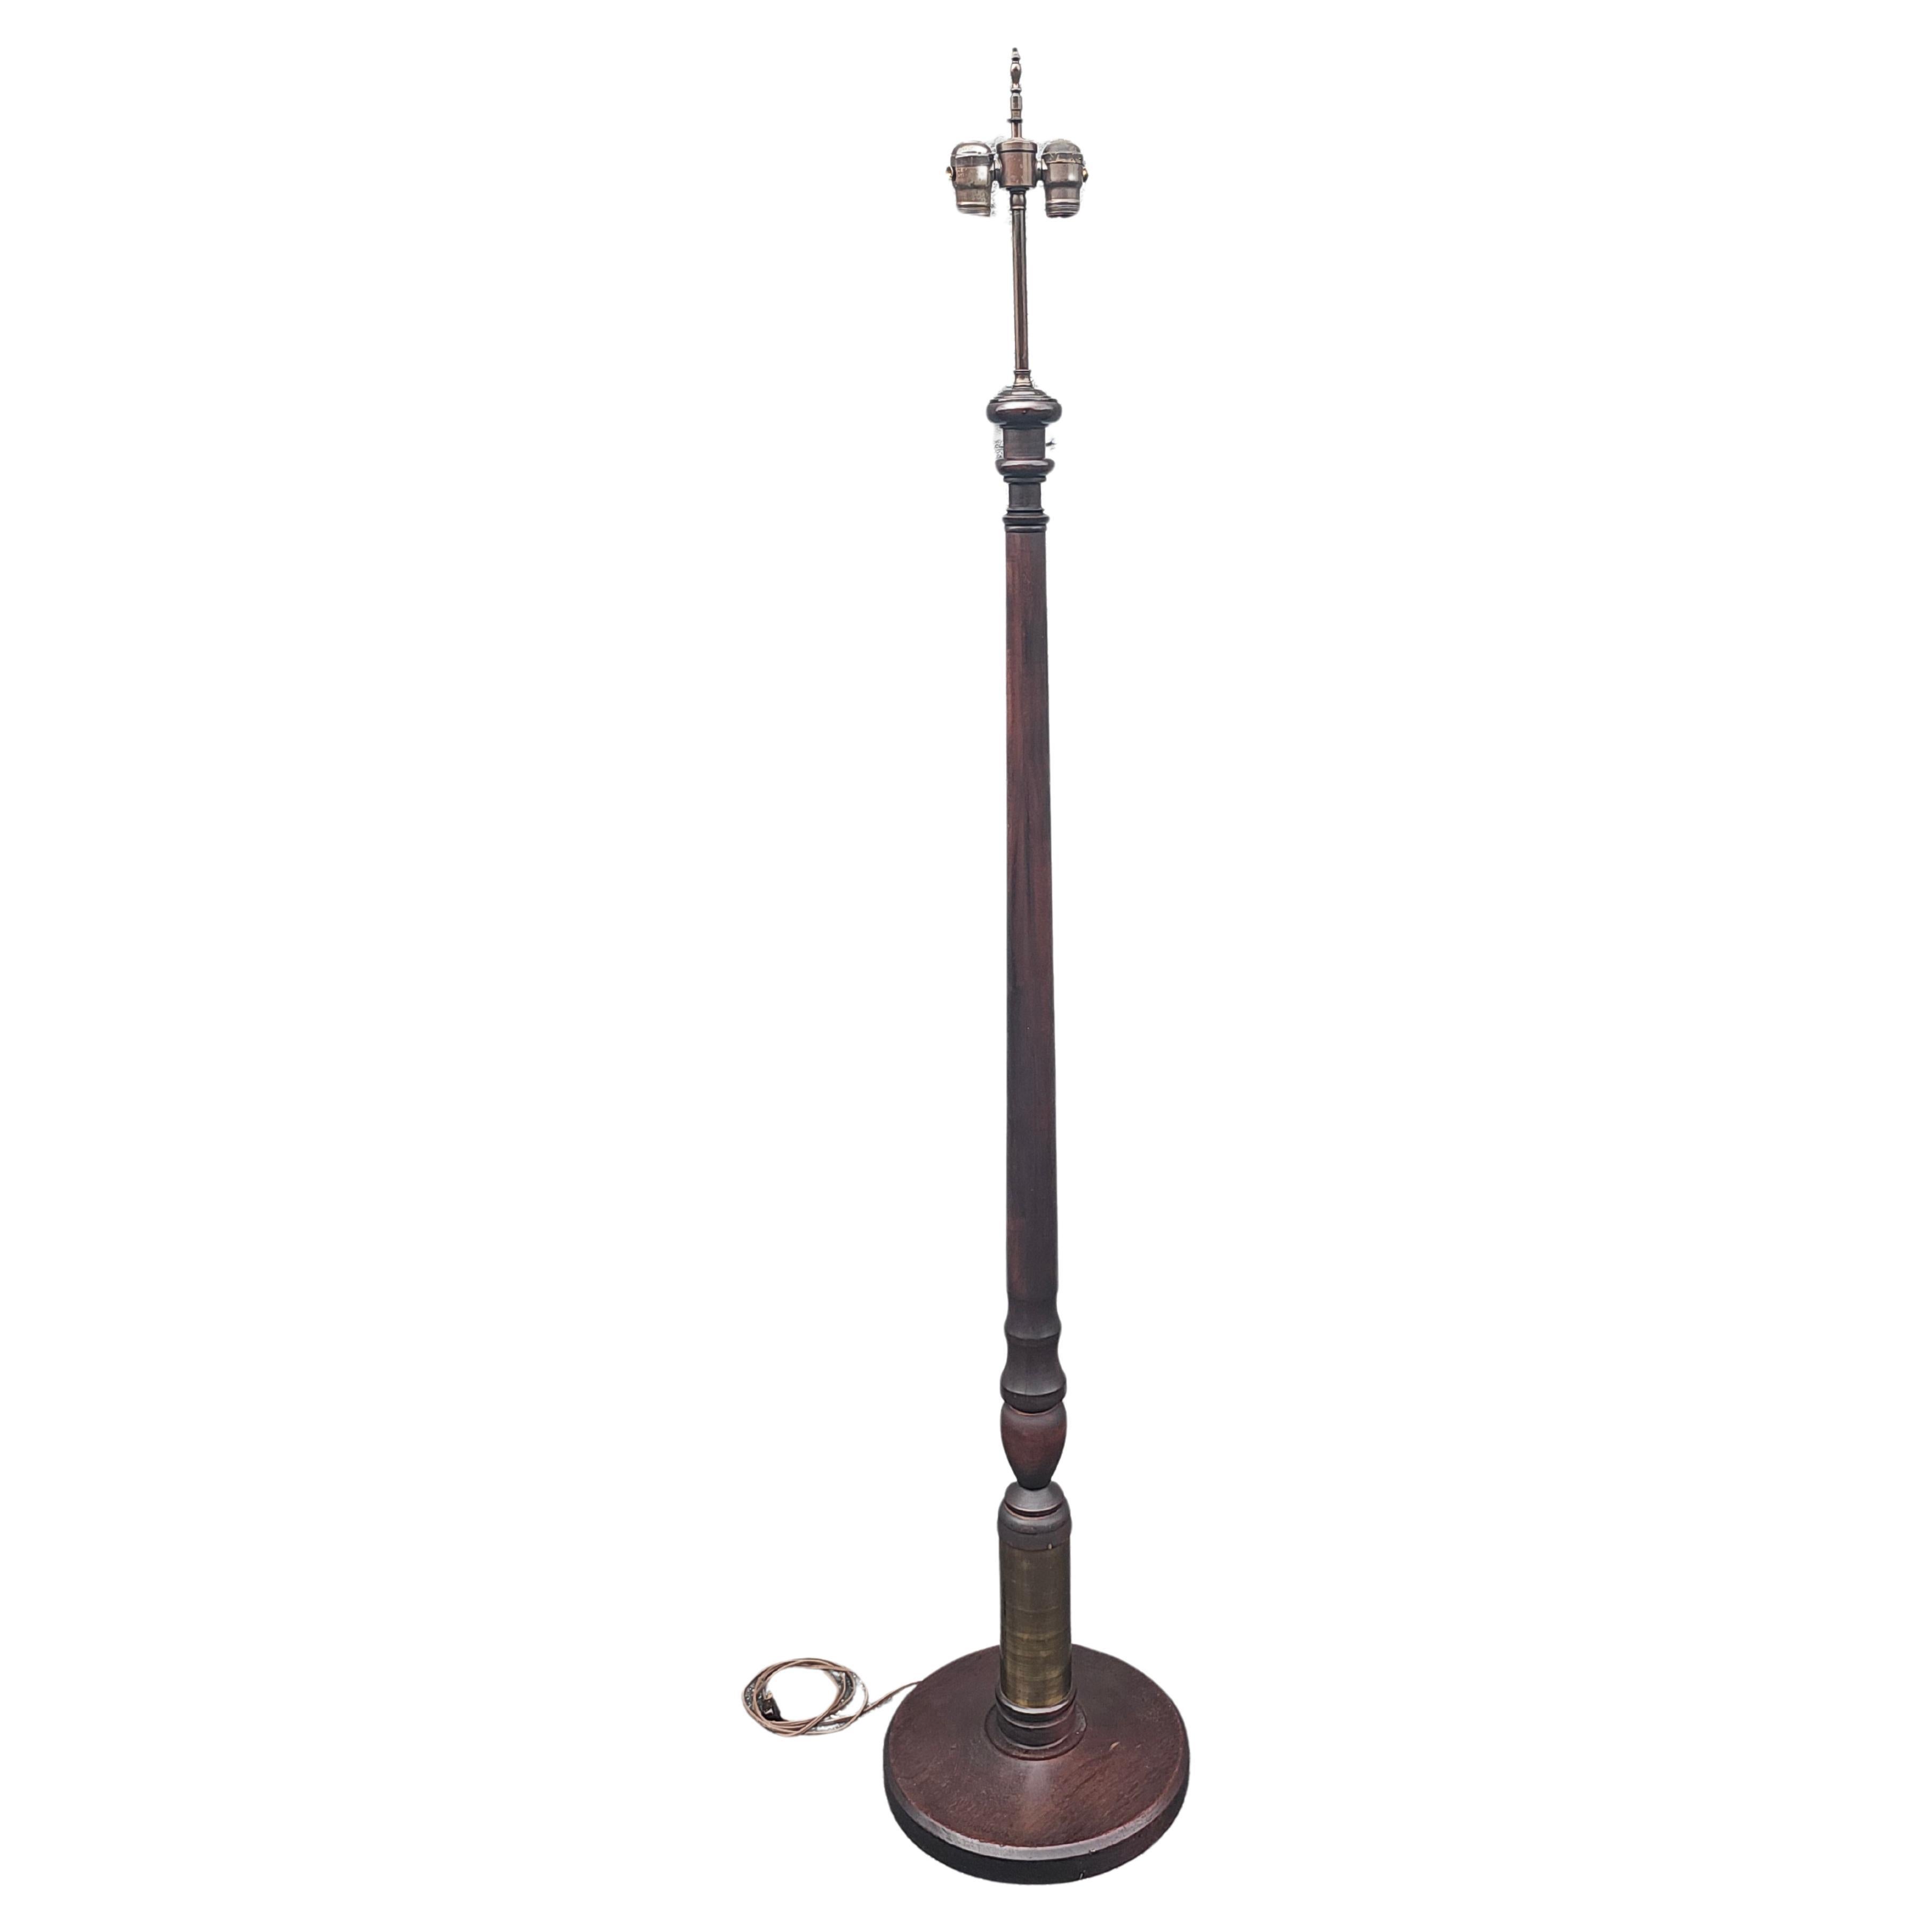 Mid-20th Century Mahogany and Brass Inset Dual Lights Floor Lamp For Sale